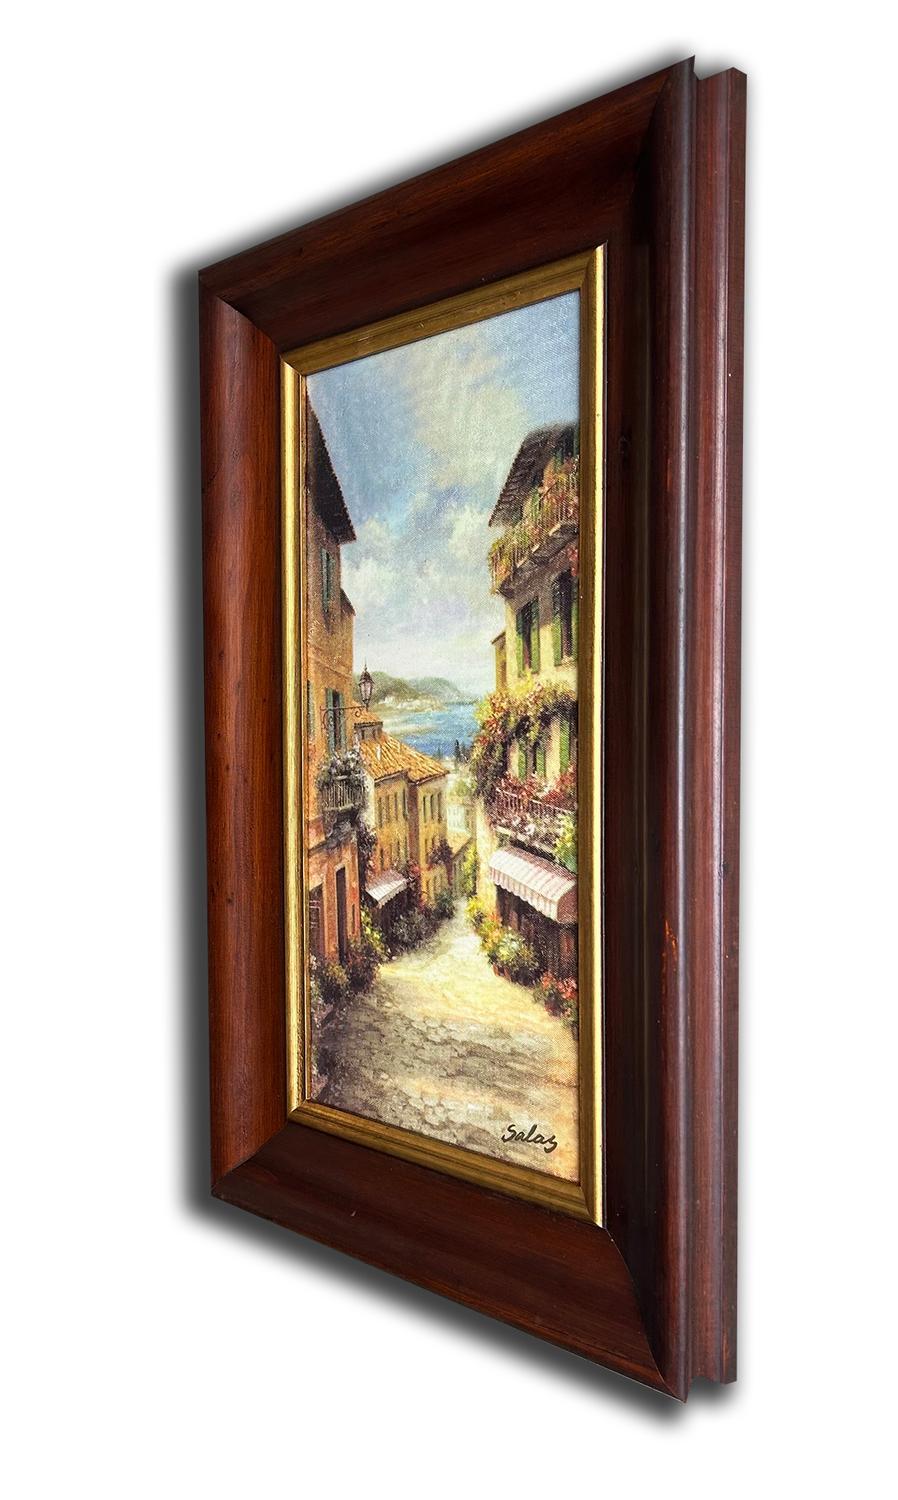 20x40 cm or 8x16 ins, wooden photo frame